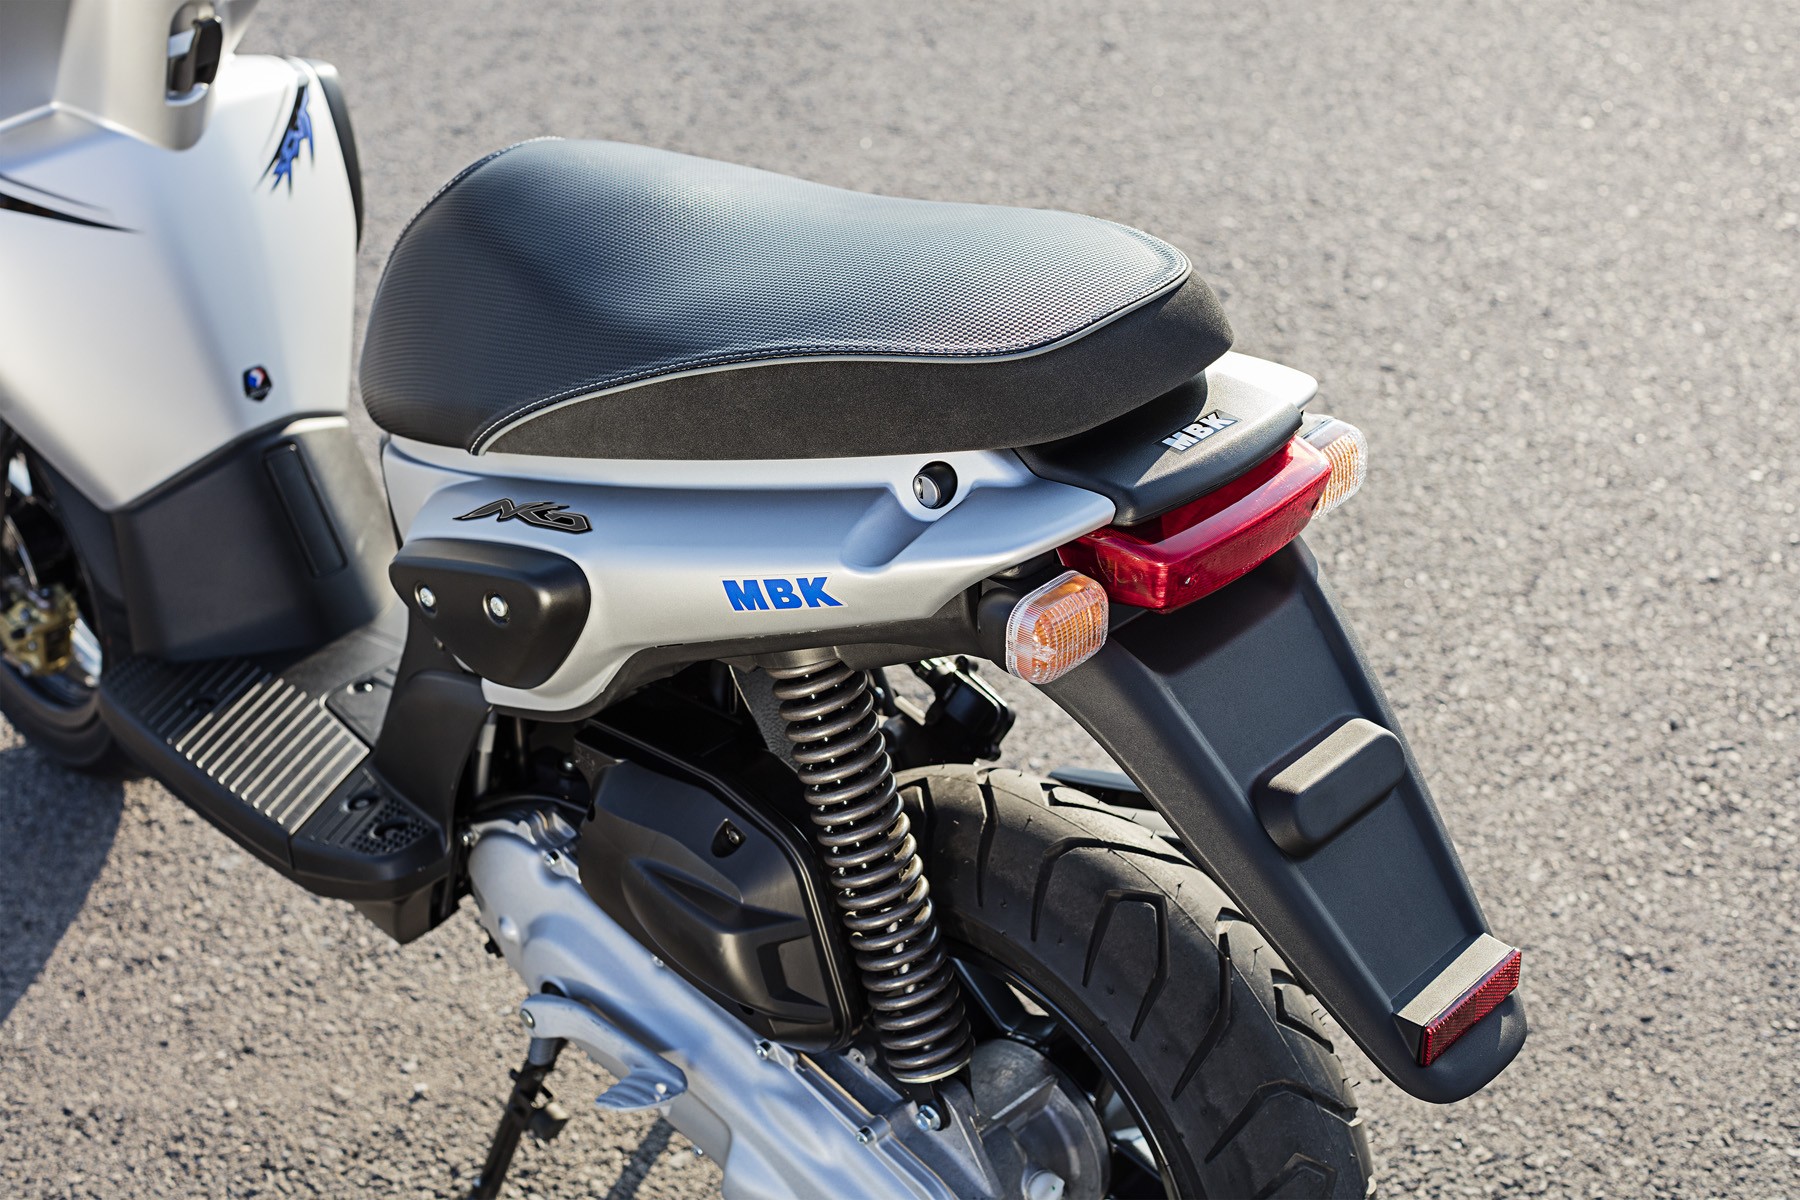 MBK Stunt Naked - Guide d'achat scooter 50